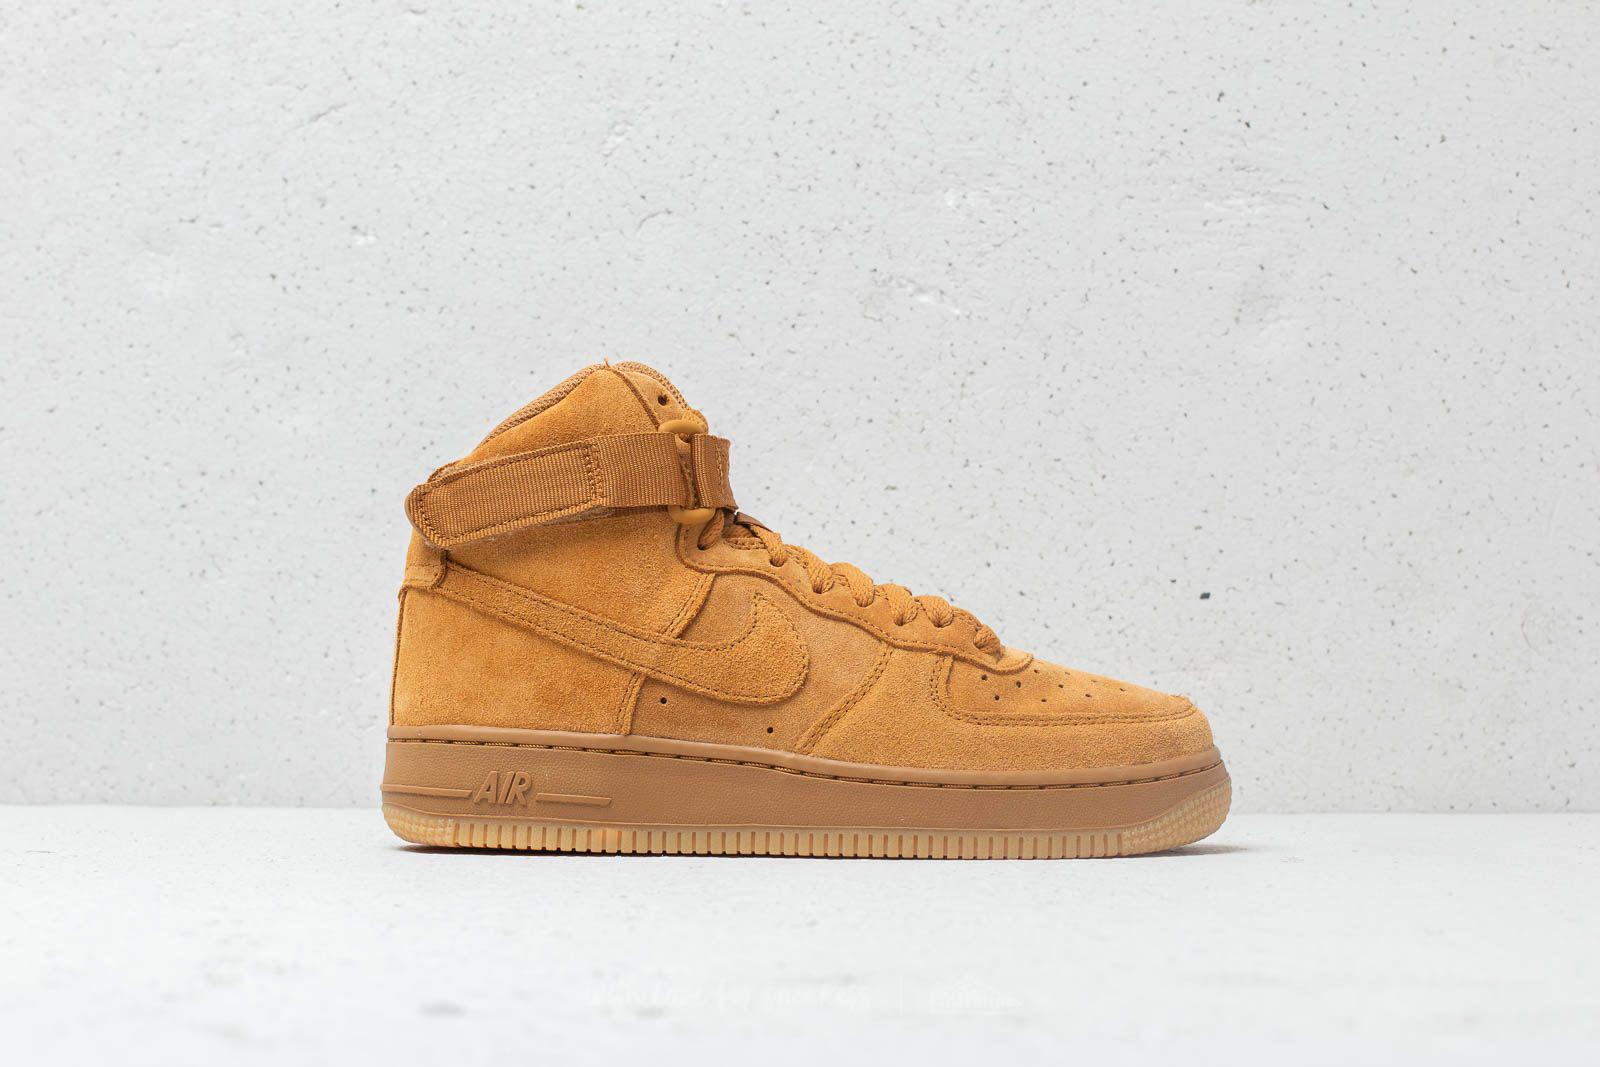 Nike - Boy - GS Air Force 1 Low - Wheat/Gum Light Brown - Nohble